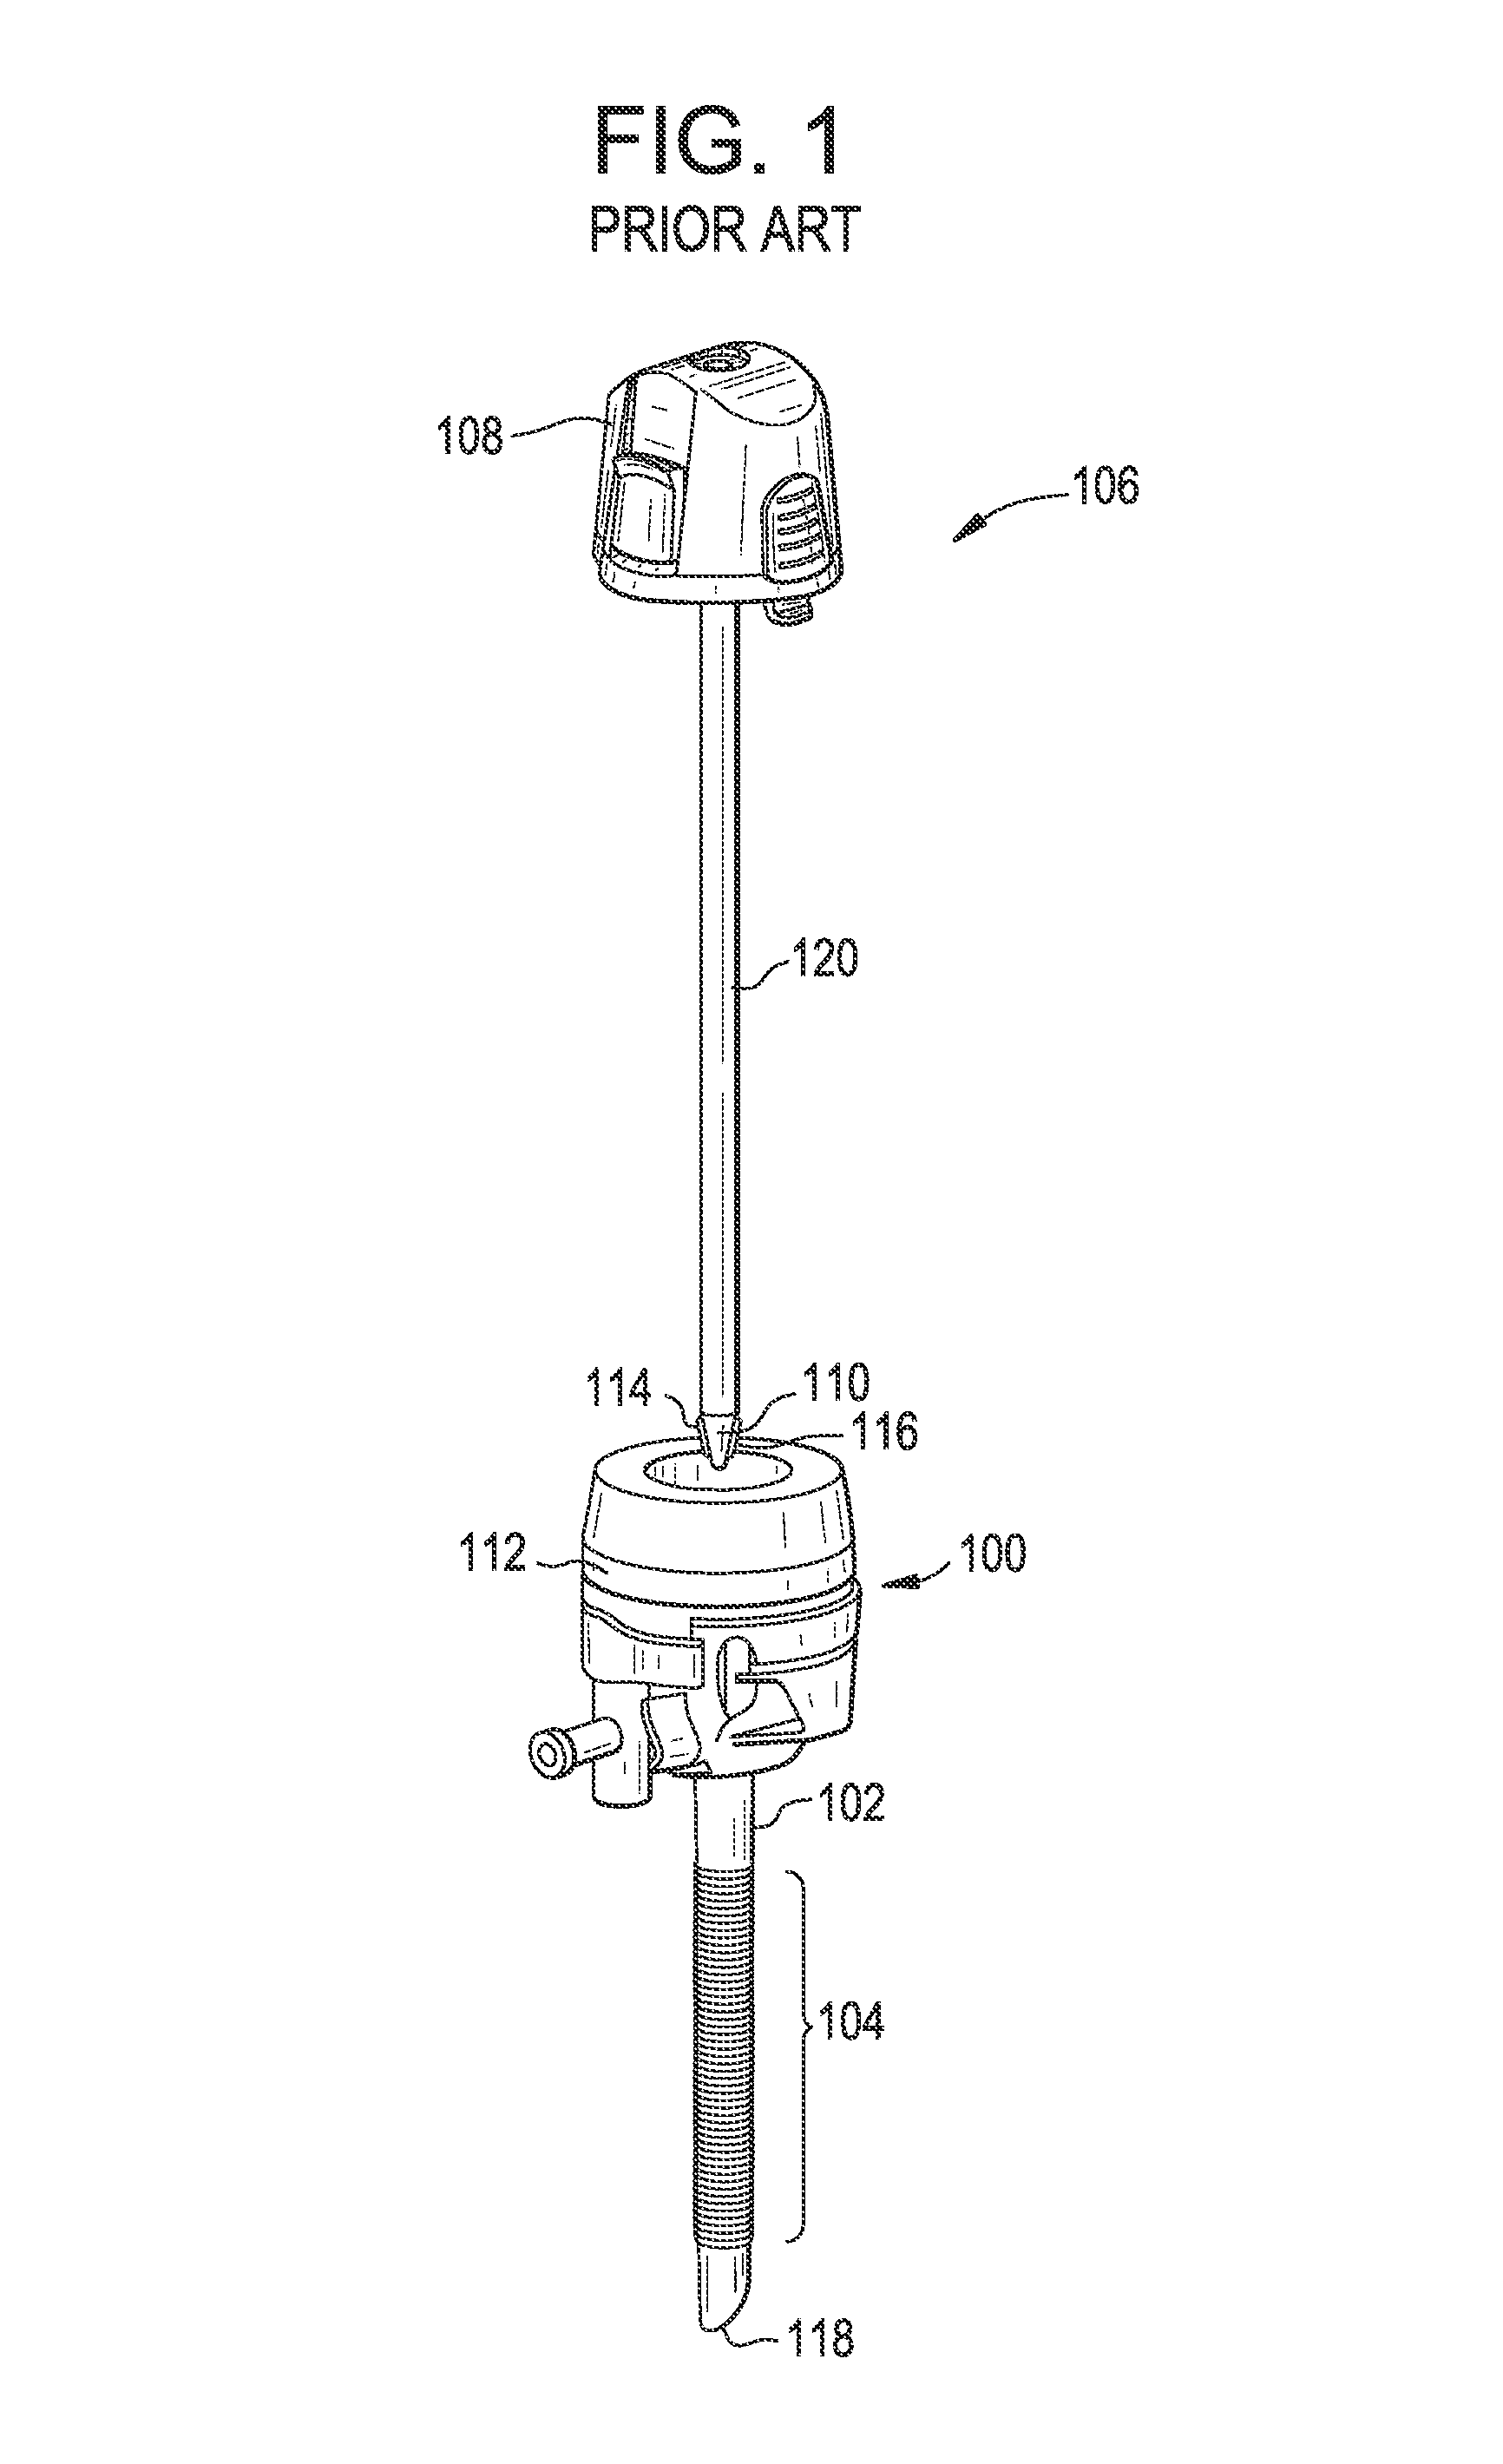 Device for anchoring a trocar